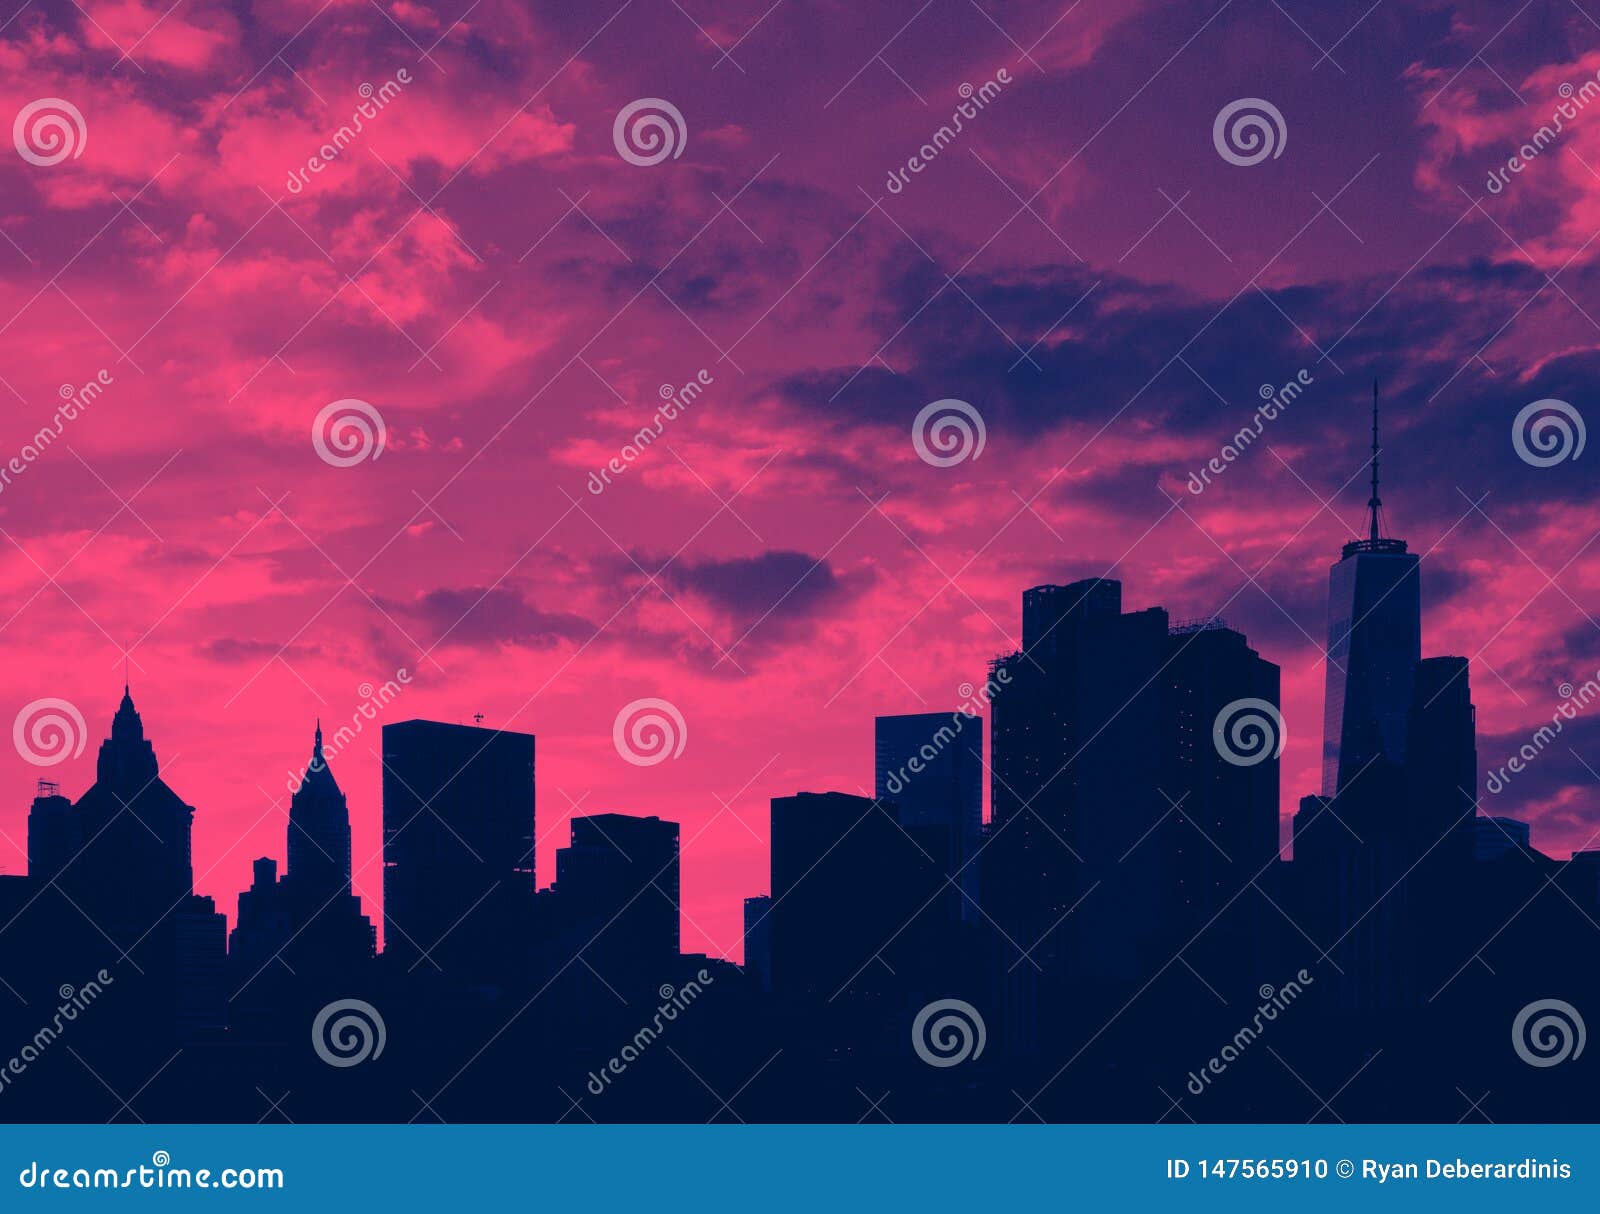 Downtown Skyline Buildings At Sunset In Manhattan New York City In